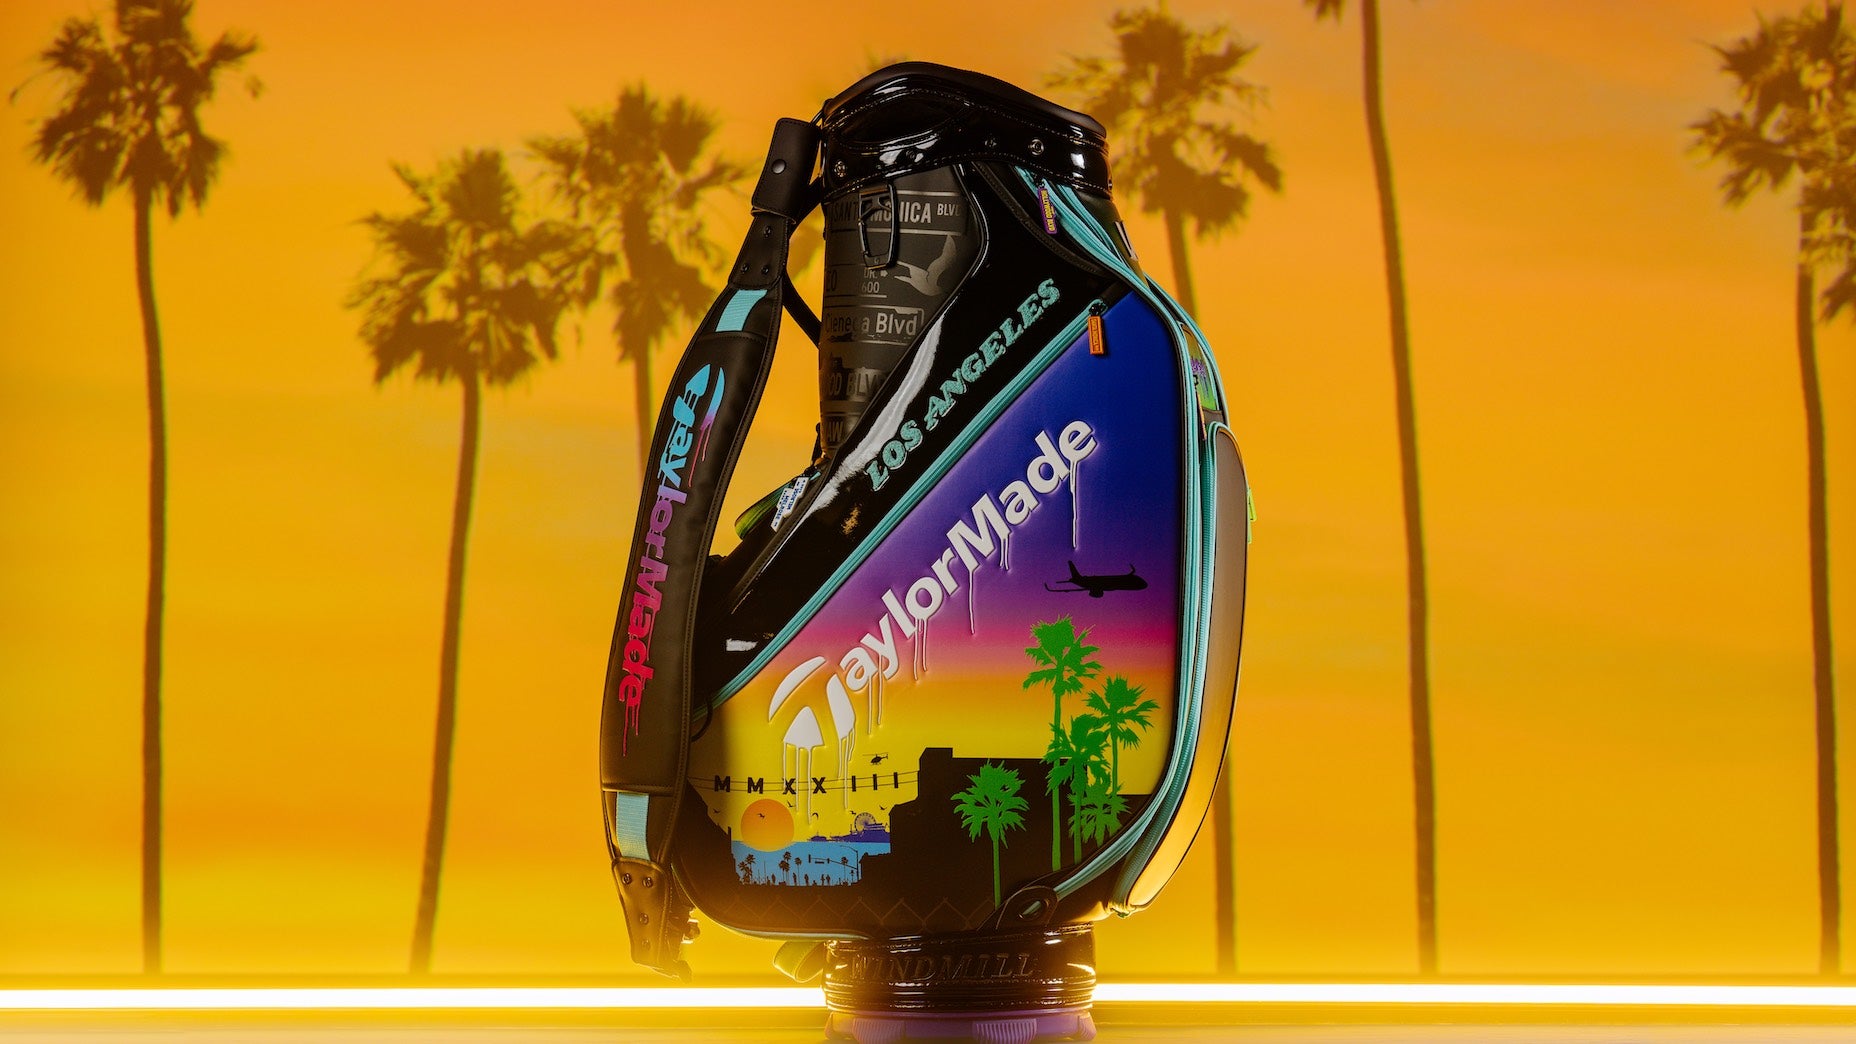 TaylorMade's audacious U.S. Open staff bag is a sight to behold